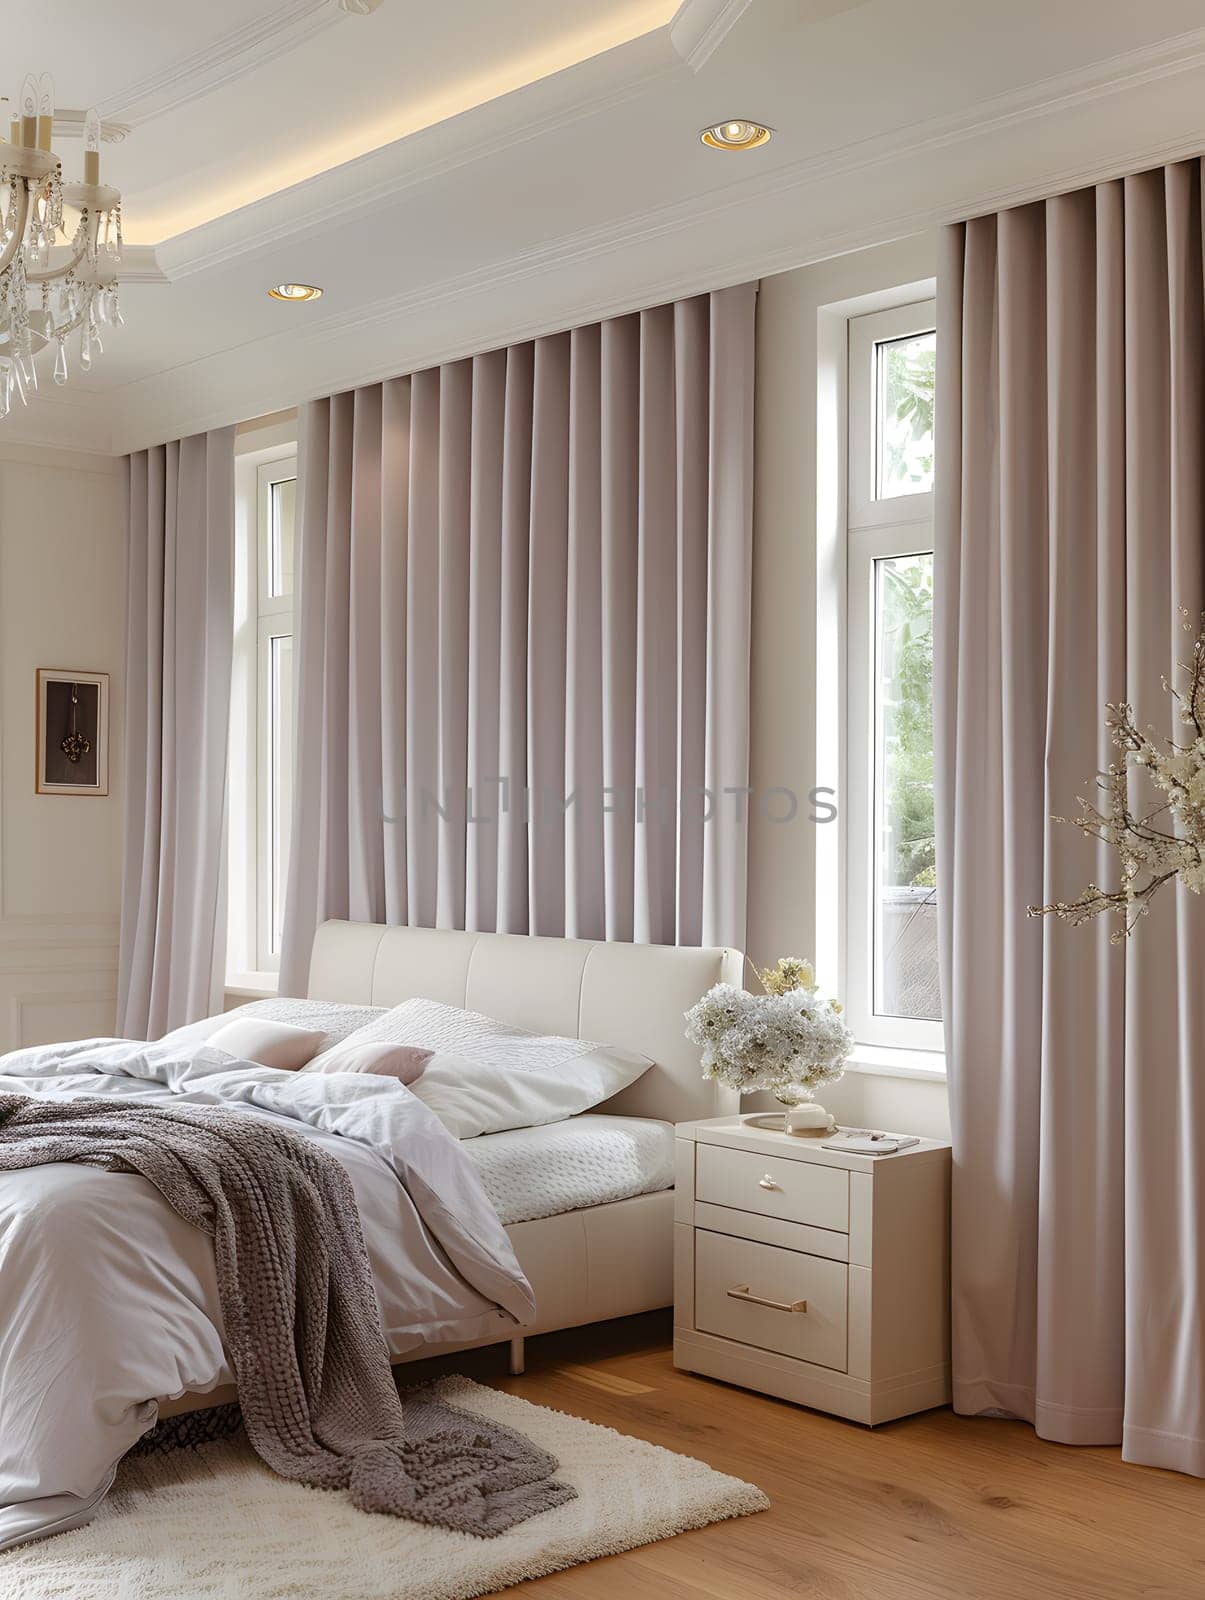 Comfortable bedroom with furniture, curtains, and chandelier for interior design by Nadtochiy